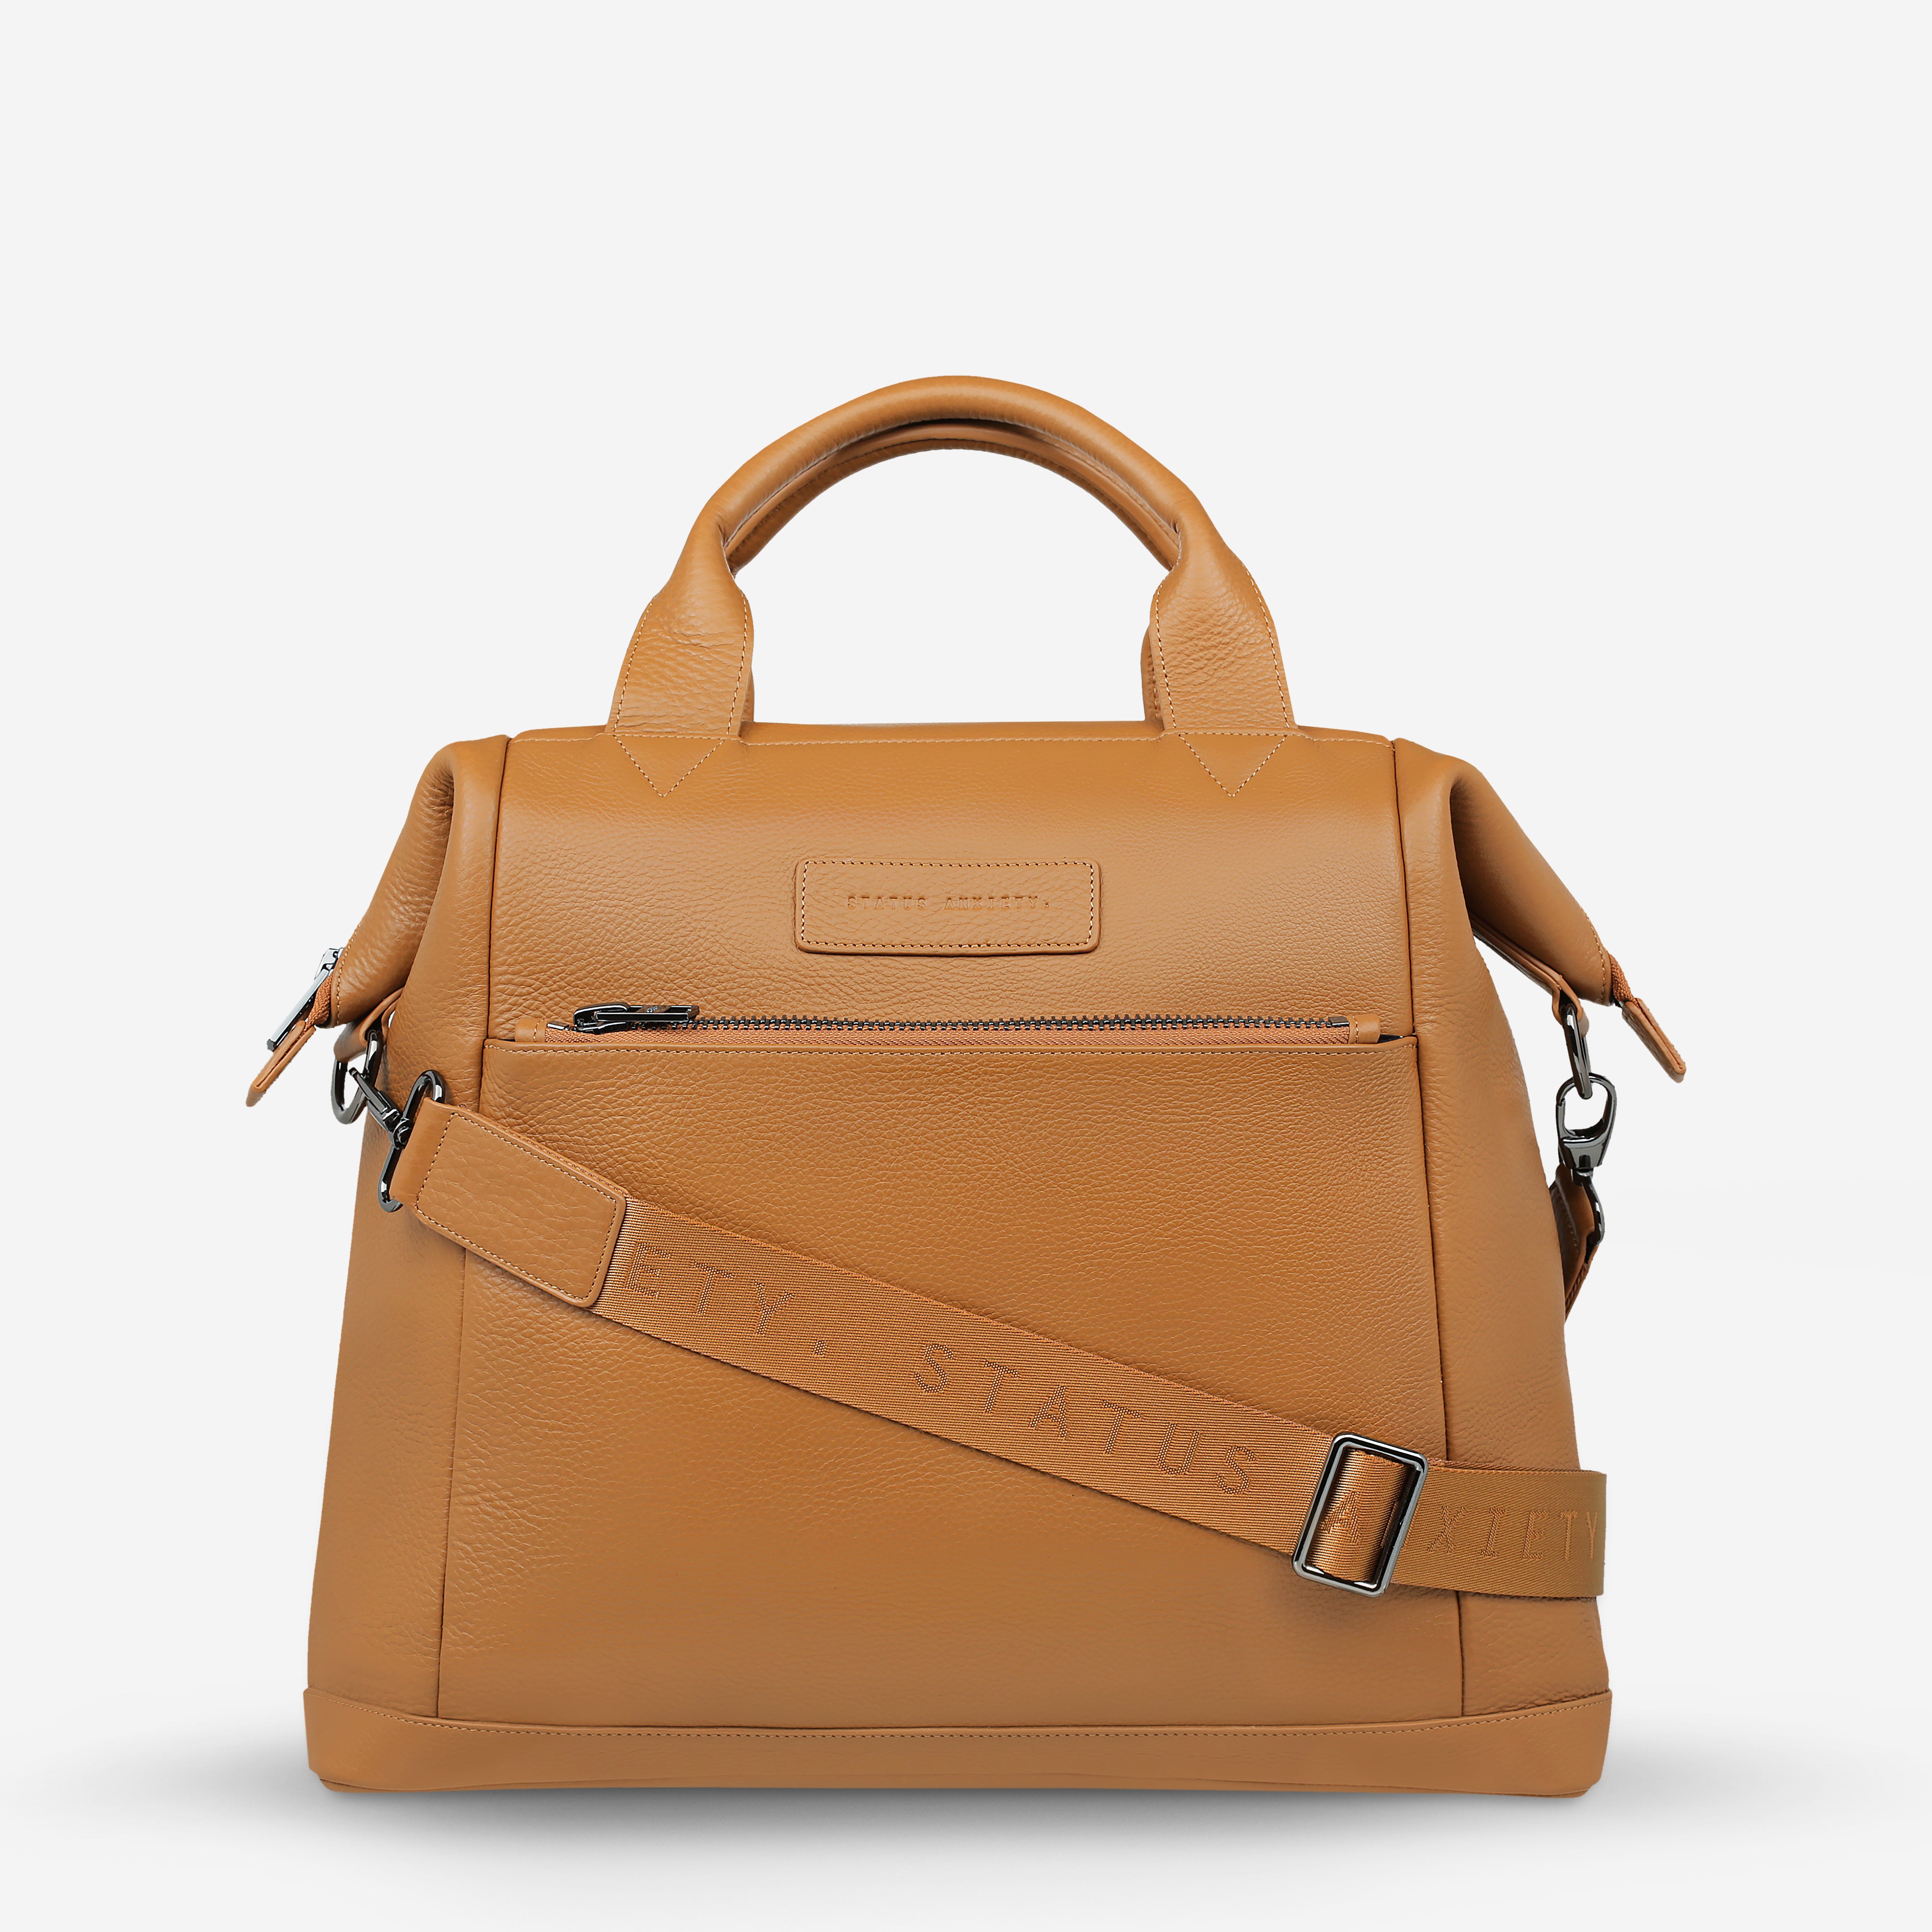 Women's Leather Bags  Shop Online at Status Anxiety®